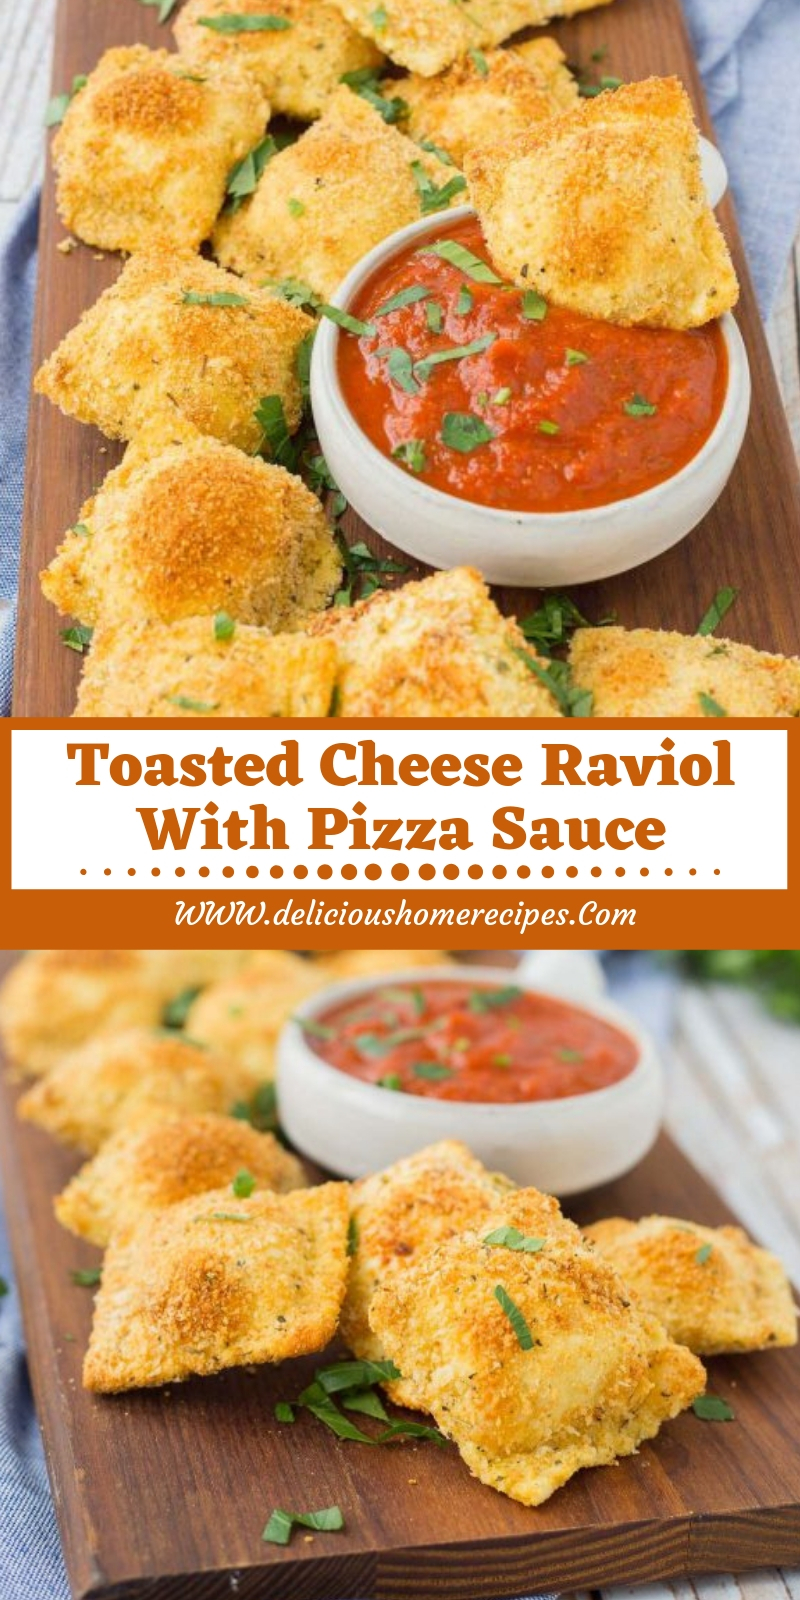 Toasted Cheese Raviol With Pizza Sauce - Bitbuzz Up